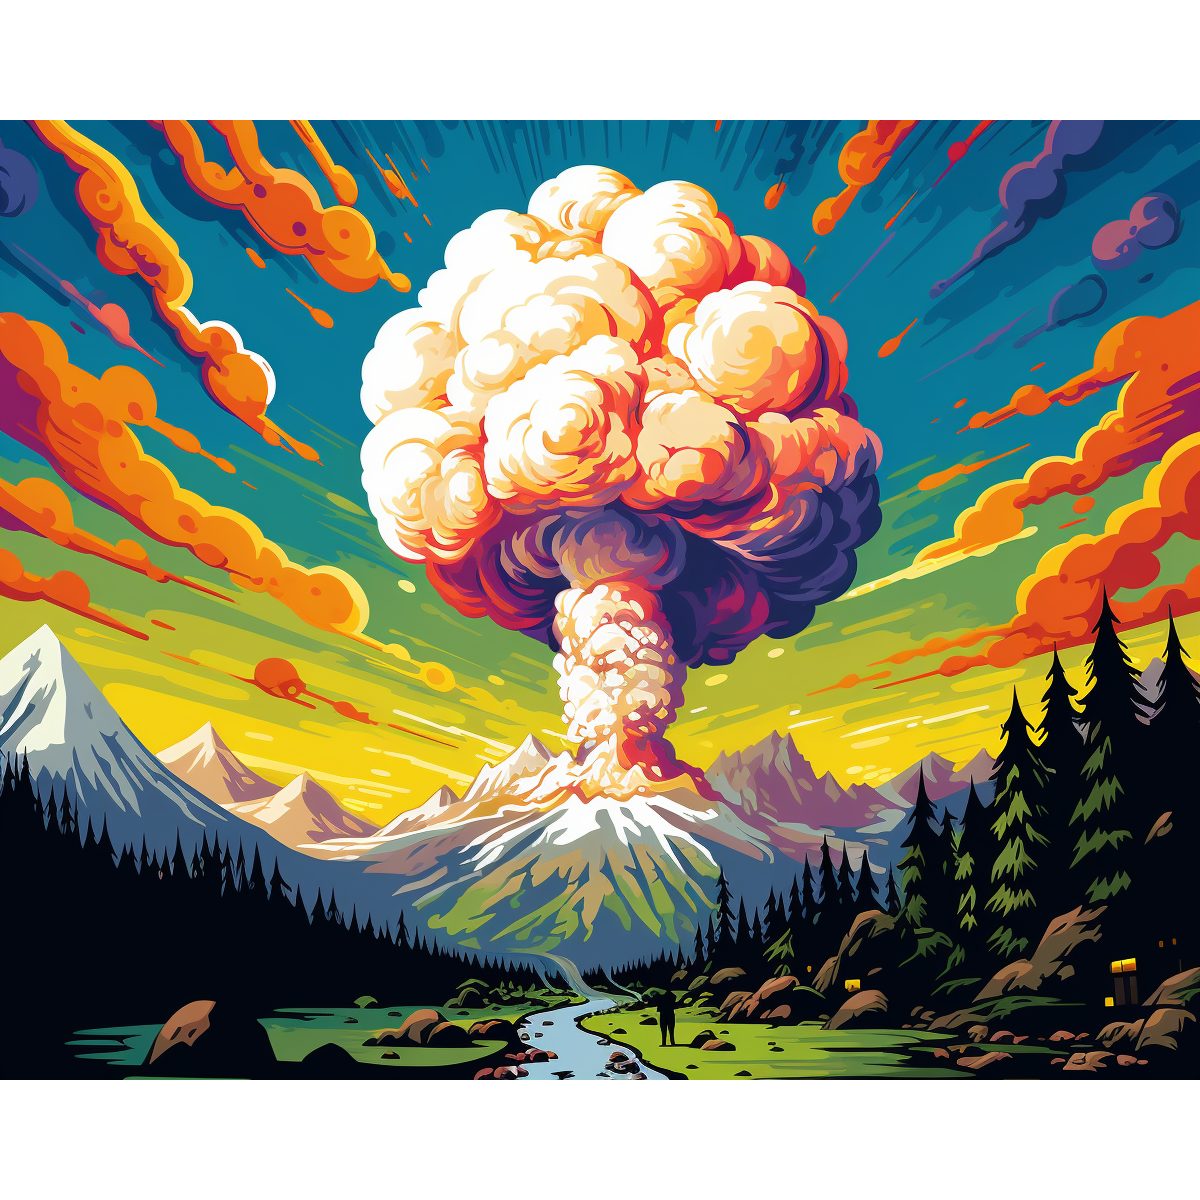 Nuclear Volcano